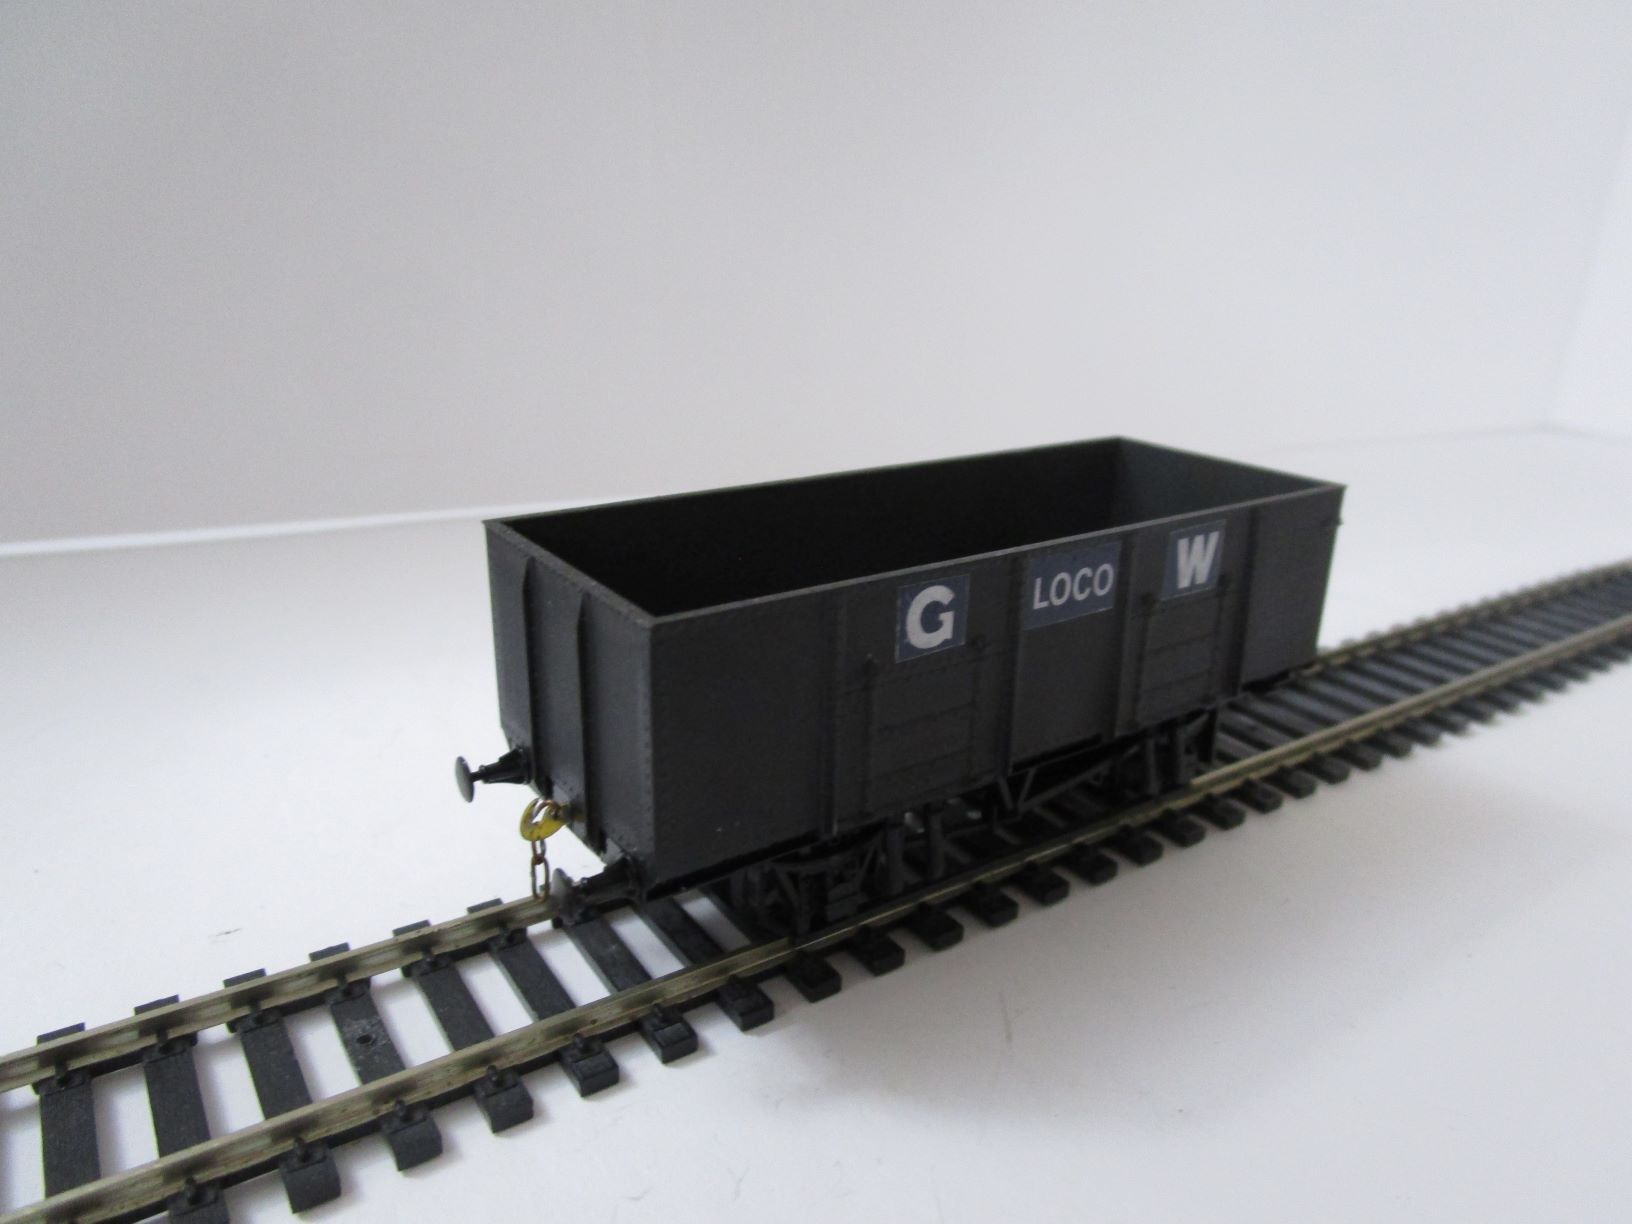 937390-P001 MAINLINE 20T Mineral Wagon - reletterd as 